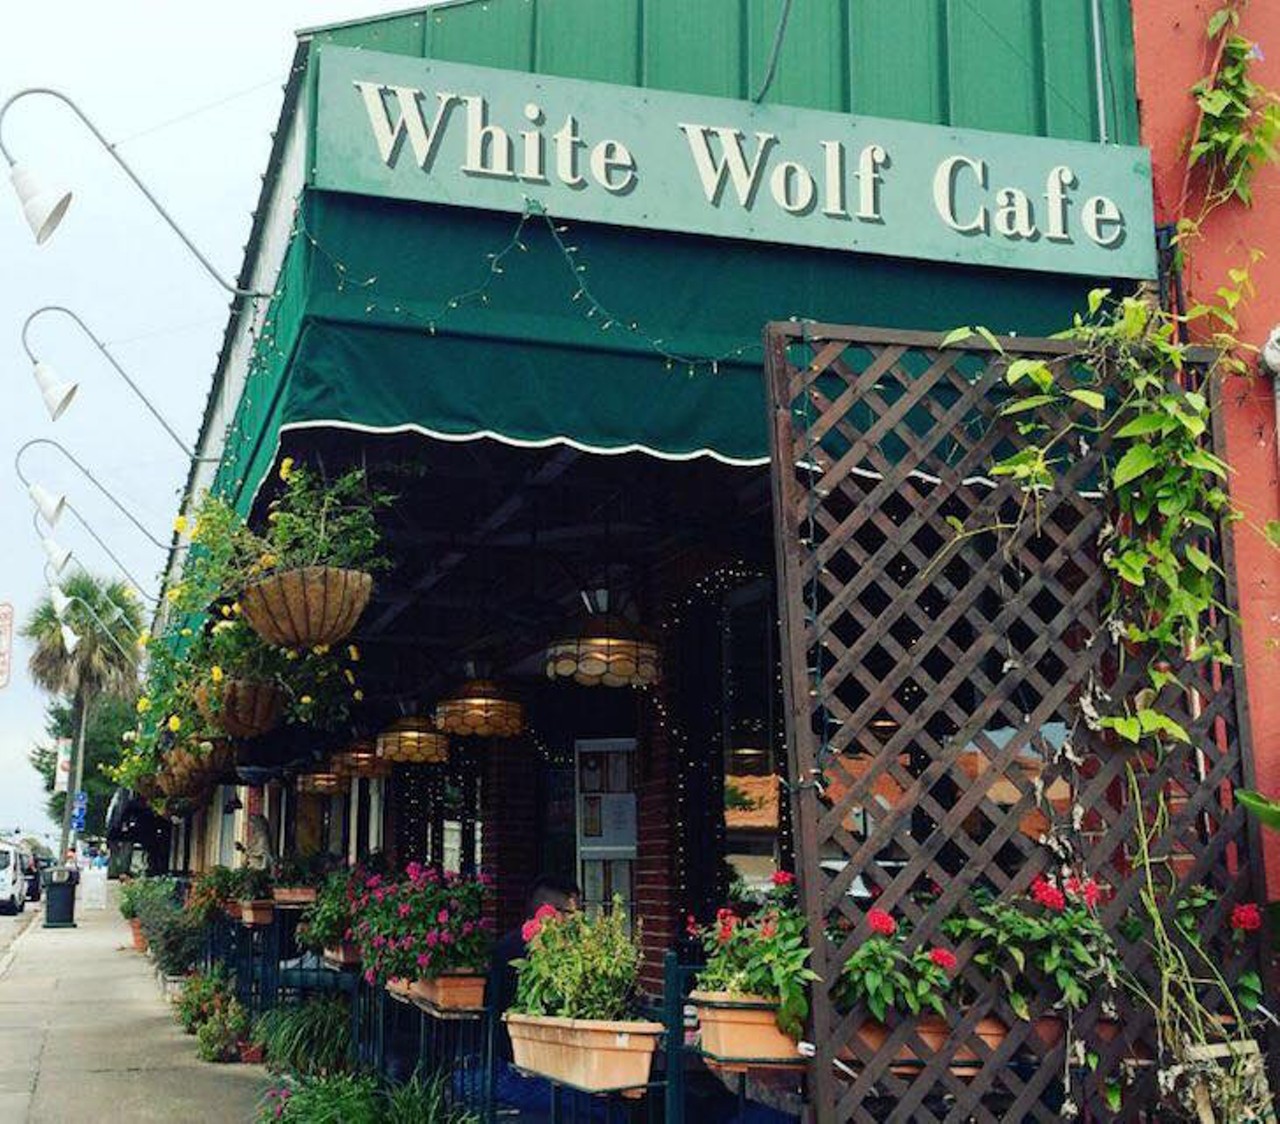 White Wolf Cafe  
$40 a Day
1829 N Orange Avenue | (407) 895-991
This quaint bistro is located in the Ivanhoe Village and serves breakfast, lunch and dinner. The episode aired in May of 2002 and featured their hummus and tabbouleh recipe. The show, like its name suggests, follows Rachael Ray as she takes day trips to American, Canadian and European cities with only $40 to spend on food.  
Photo via White Wolf Cafe/Facebook